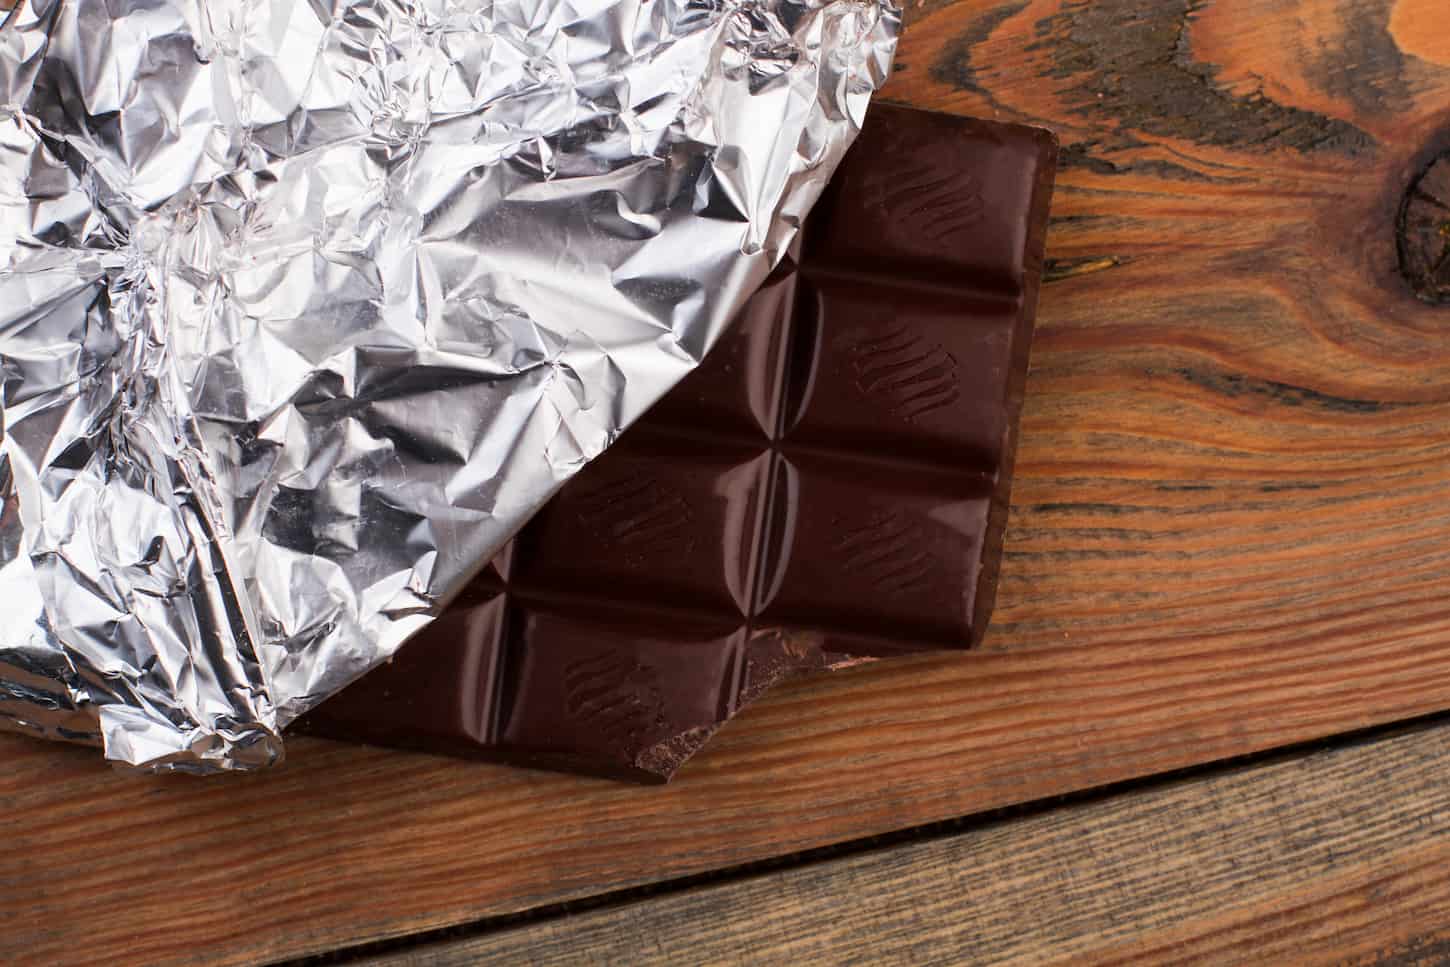 An image of a chocolate bar wrapped in silver foil.